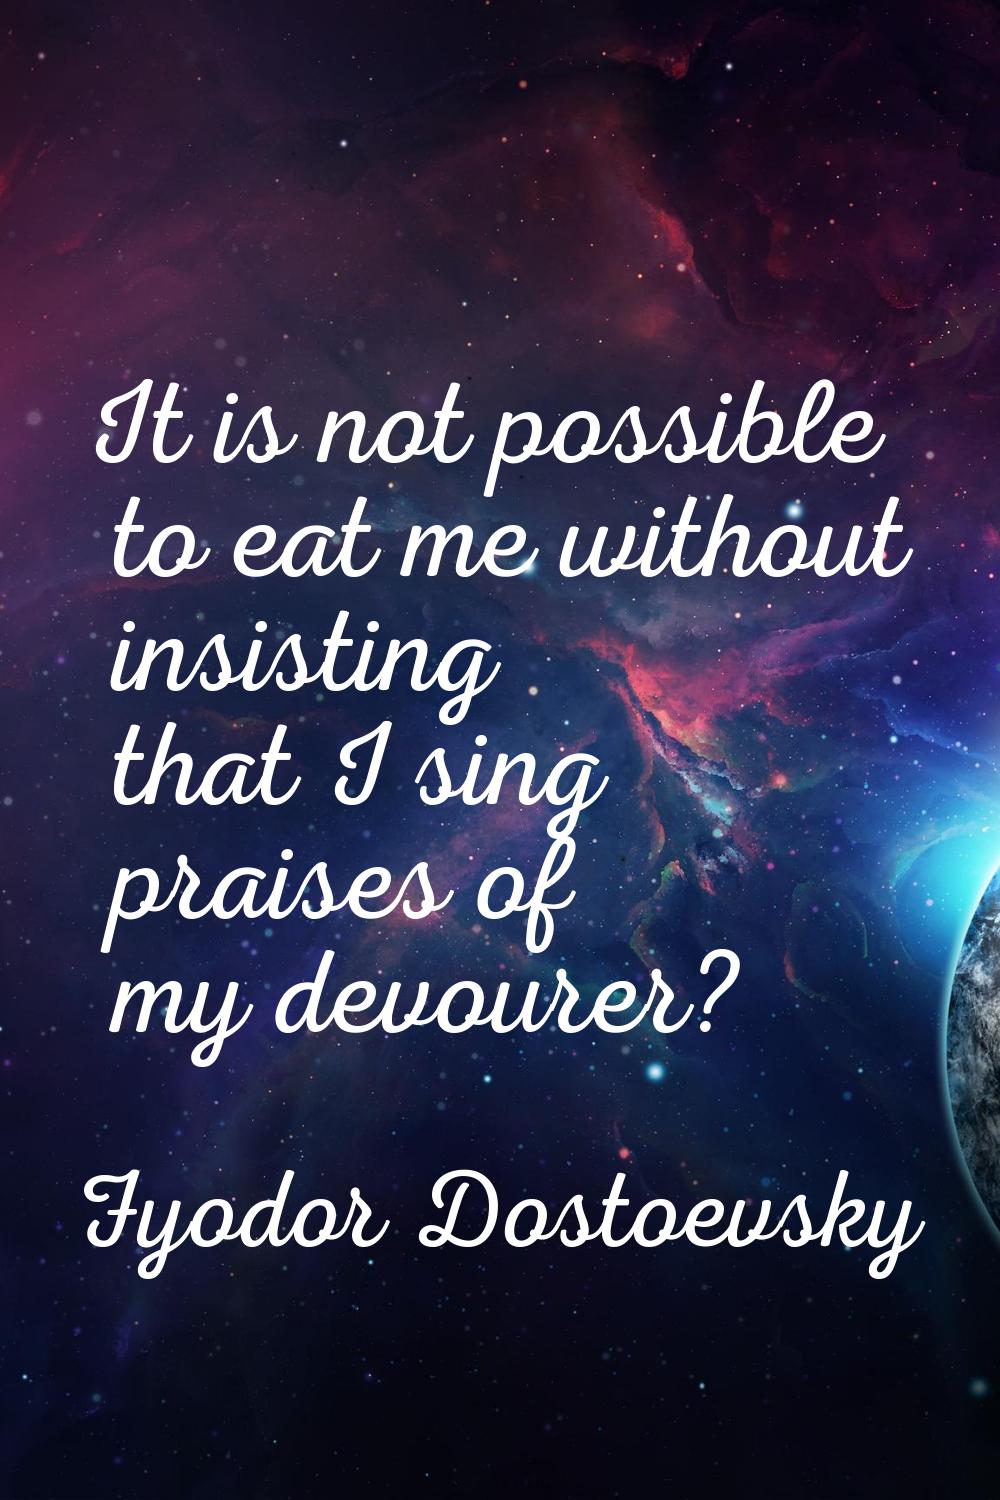 It is not possible to eat me without insisting that I sing praises of my devourer?